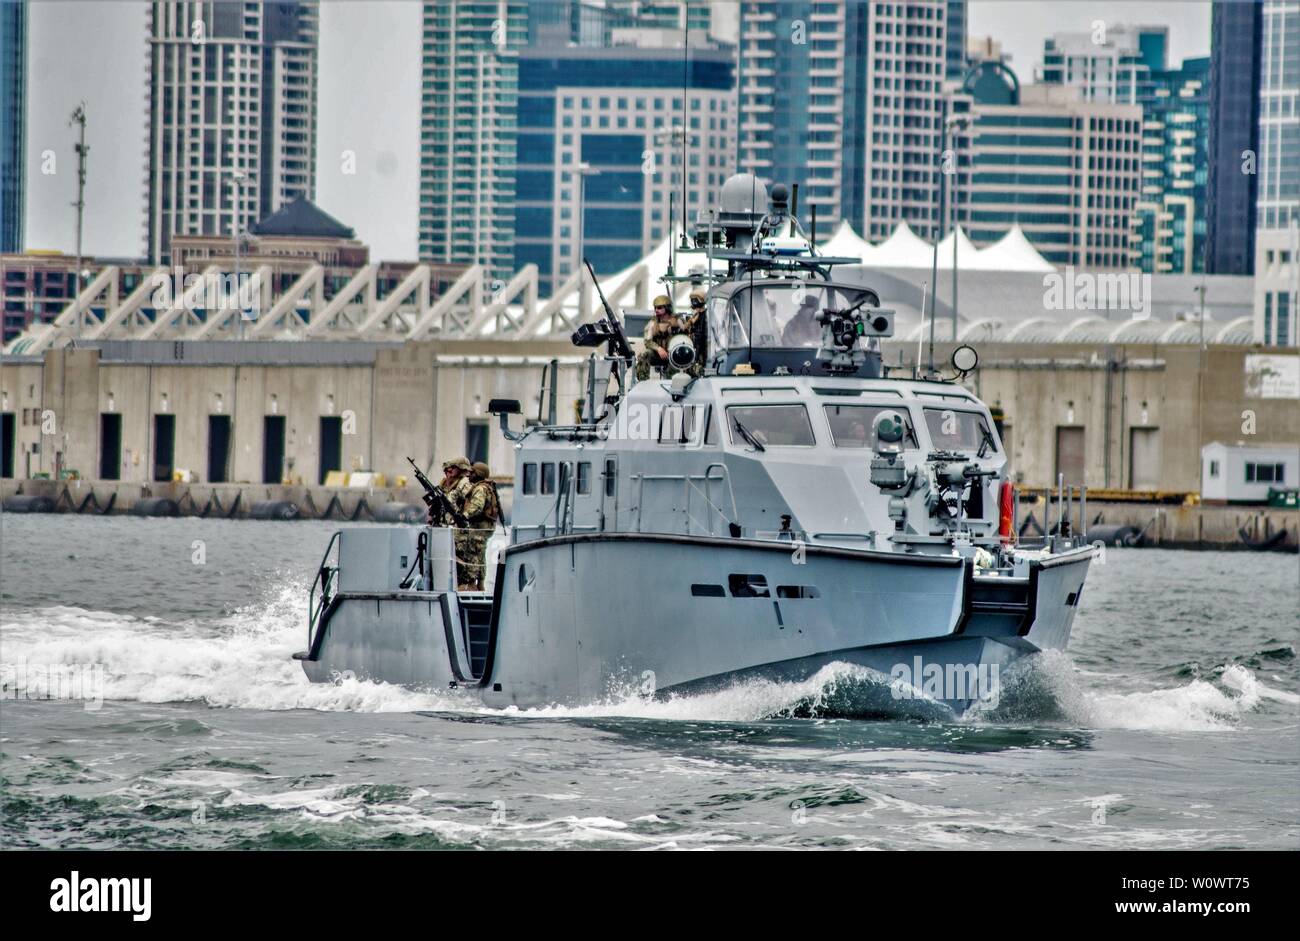 190620-N-NT795-127 SAN DIEGO (June 20, 2019) Sailors assigned to Coastal Riverine Squadron (CRS) 3, are underway aboard a MKVI patrol boat during unit level training provided by Coastal Riverine Group (CRG) 1 Training and Evaluation Unit. The Coastal Riverine Force provides a core capability to defend designated high value assets throughout the green and blue-water environment and provides deployable Adaptive Force Packages (AFP) worldwide in an integrated, joint and combined theater of operations. (U.S. Navy photo by Chief Boatswain’s Mate Nelson Doromal Jr) Stock Photo